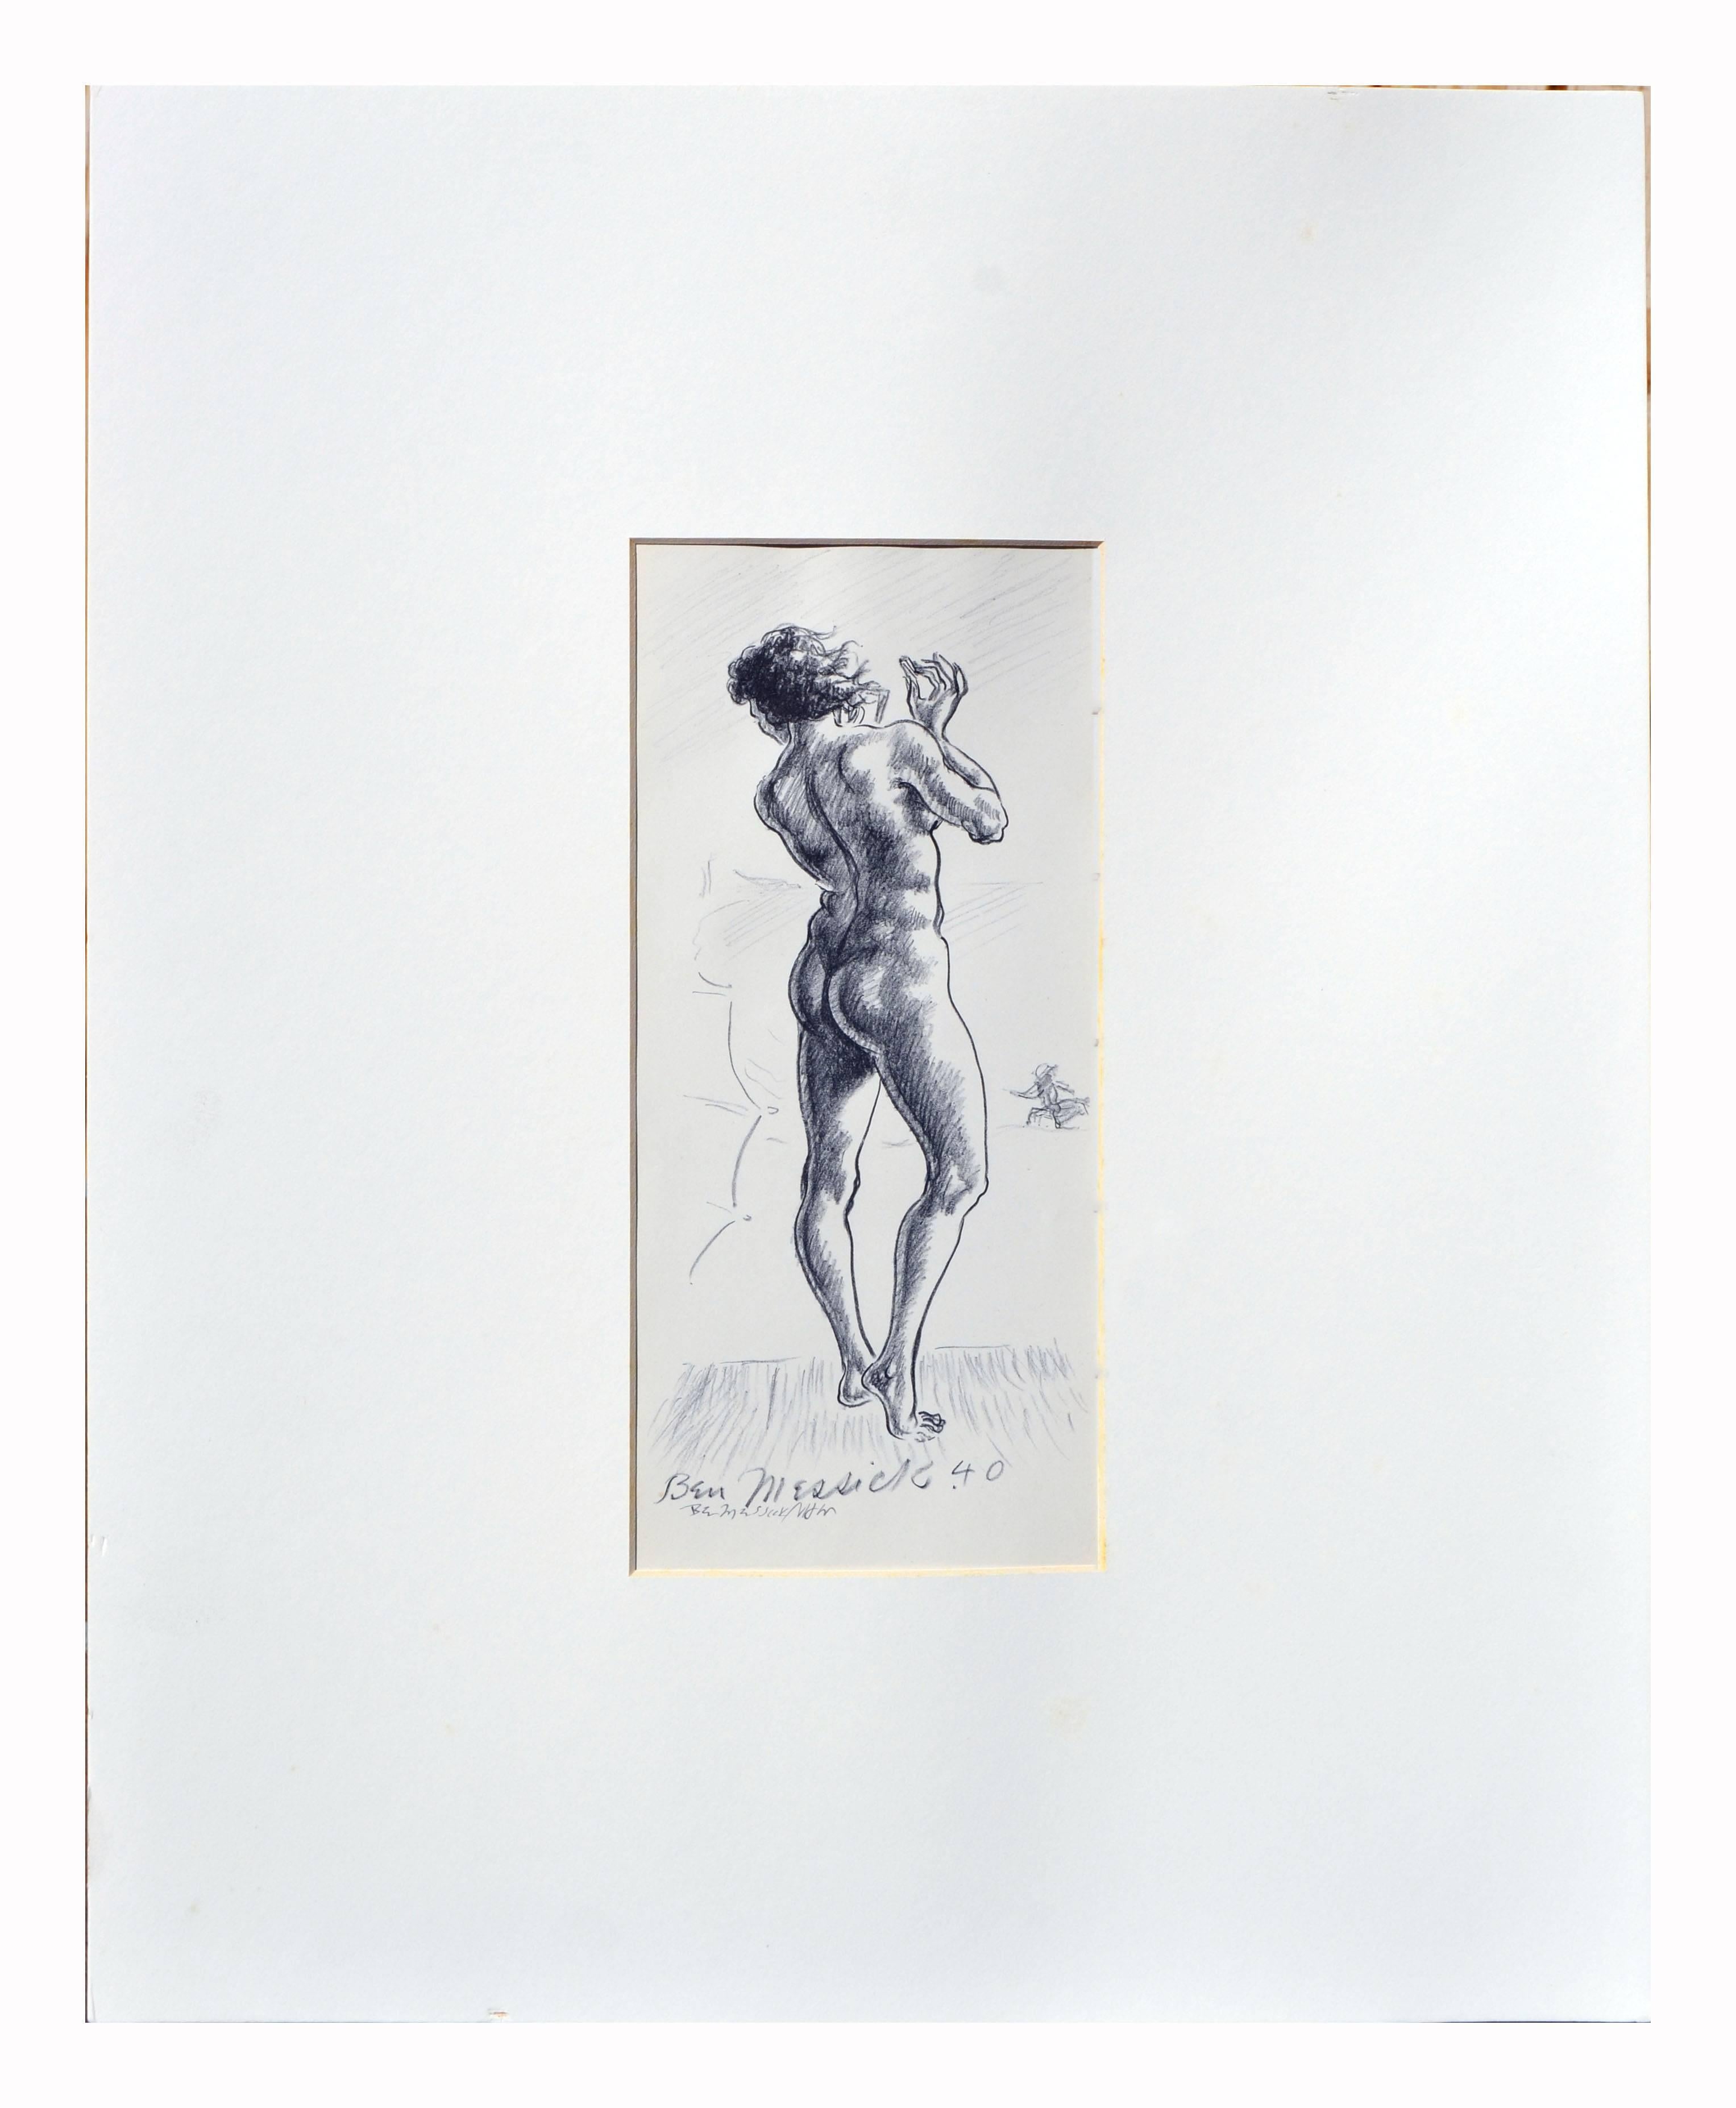 On the Beach Baroque Style Figurative - Print by Ben Messick